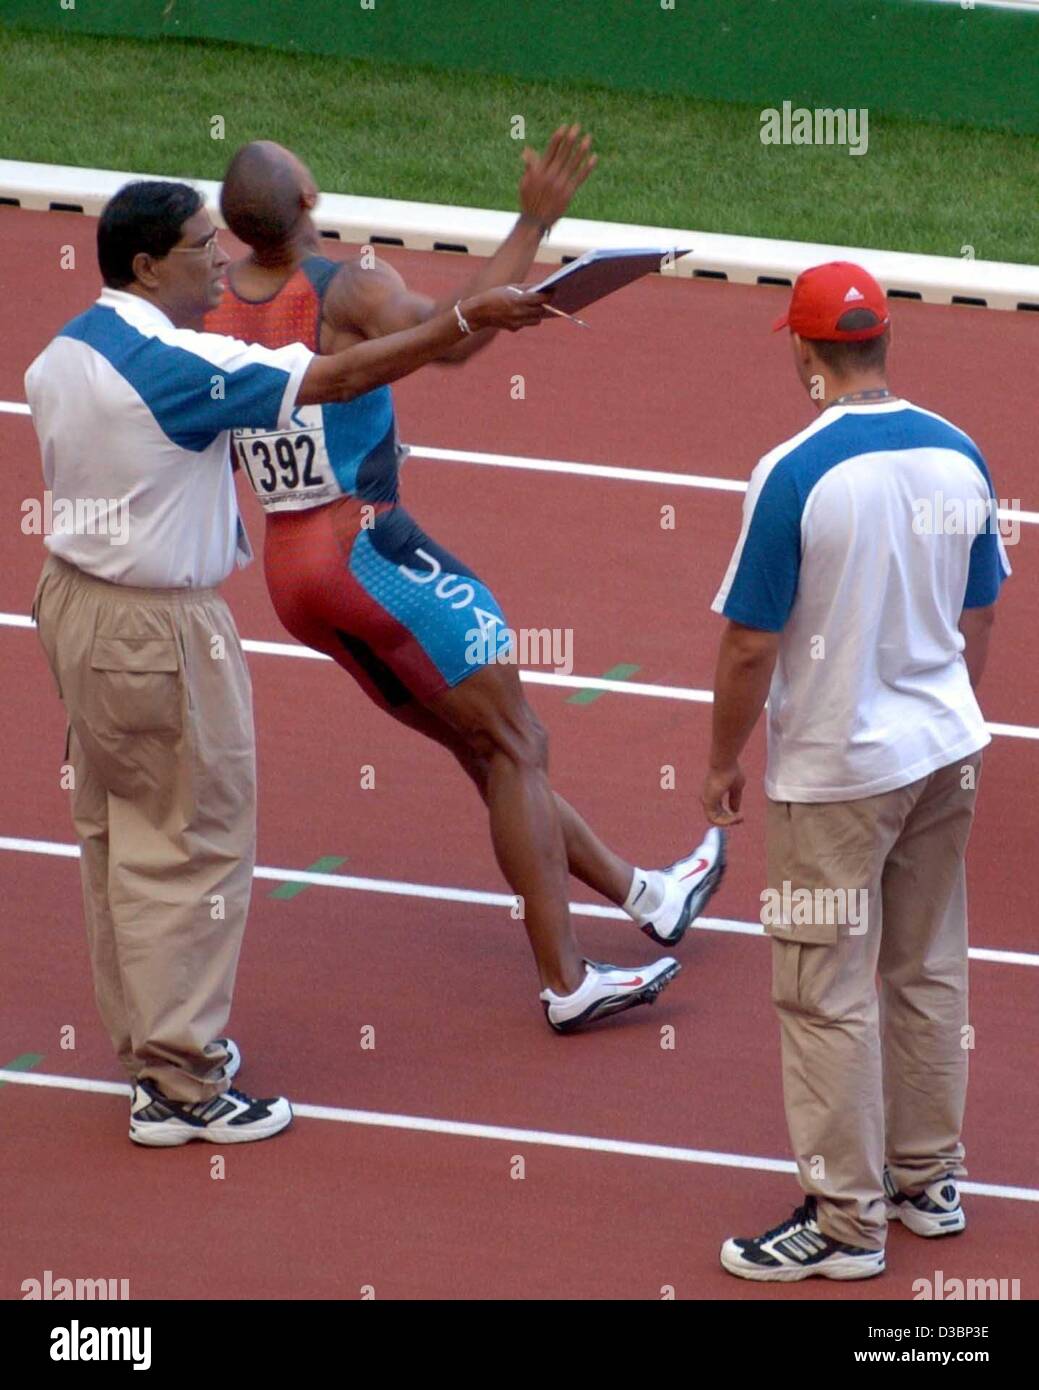 (dpa) - USA's Jon Drummond protests following a controversial false start decision against him in the quater finals of the men's 100m event at the 9th IAAF Athletic World Championships at the Stade de France in Paris, 24 August 2003. Drummond laid down on his back, refusing to move off the track aft Stock Photo